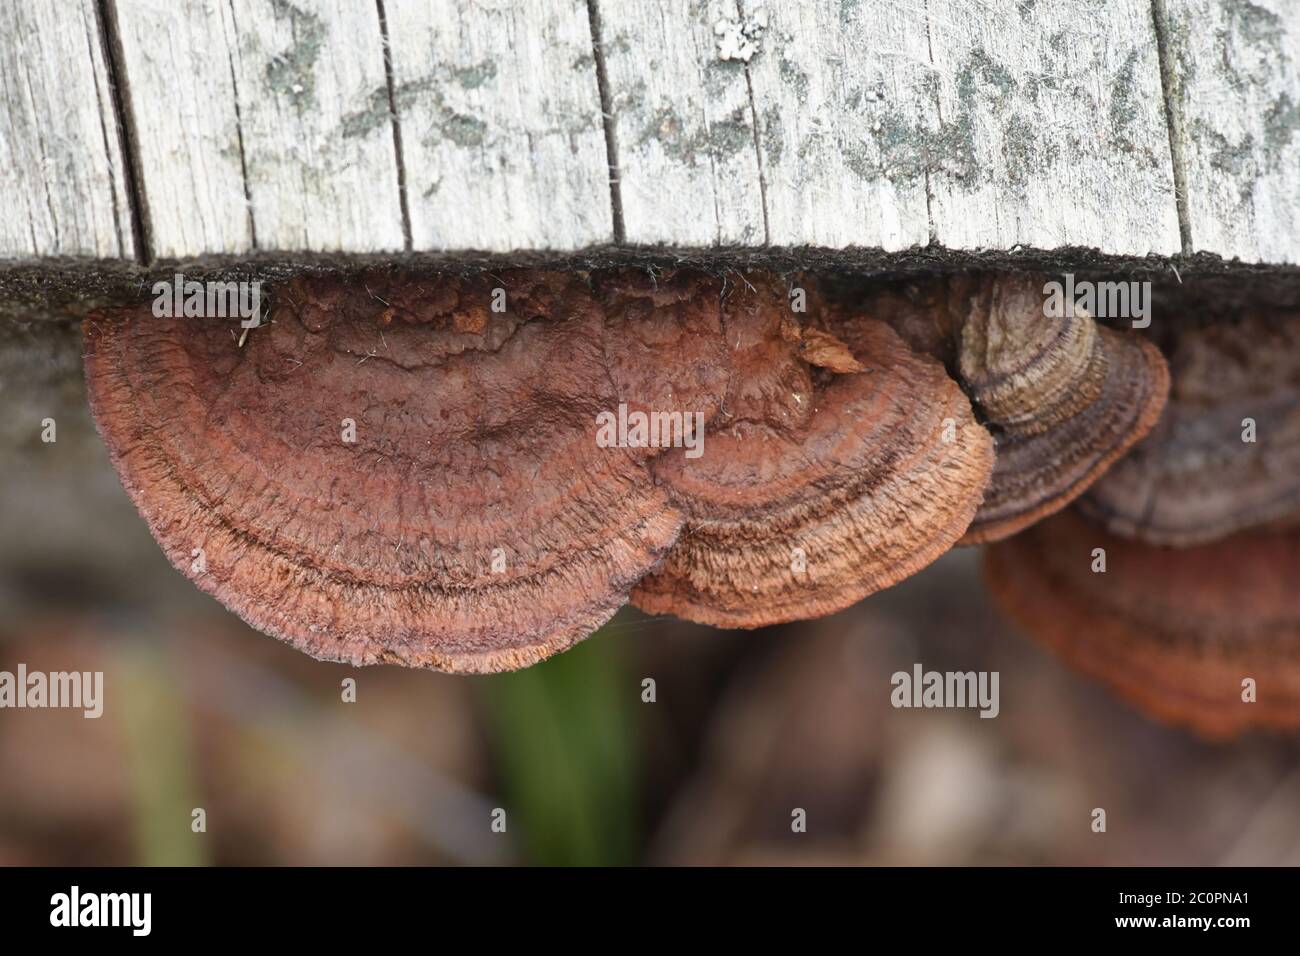 Gloeophyllum sepiarium, the rusty gilled polypore or conifer mazgill, a bracket fungus from Finland Stock Photo